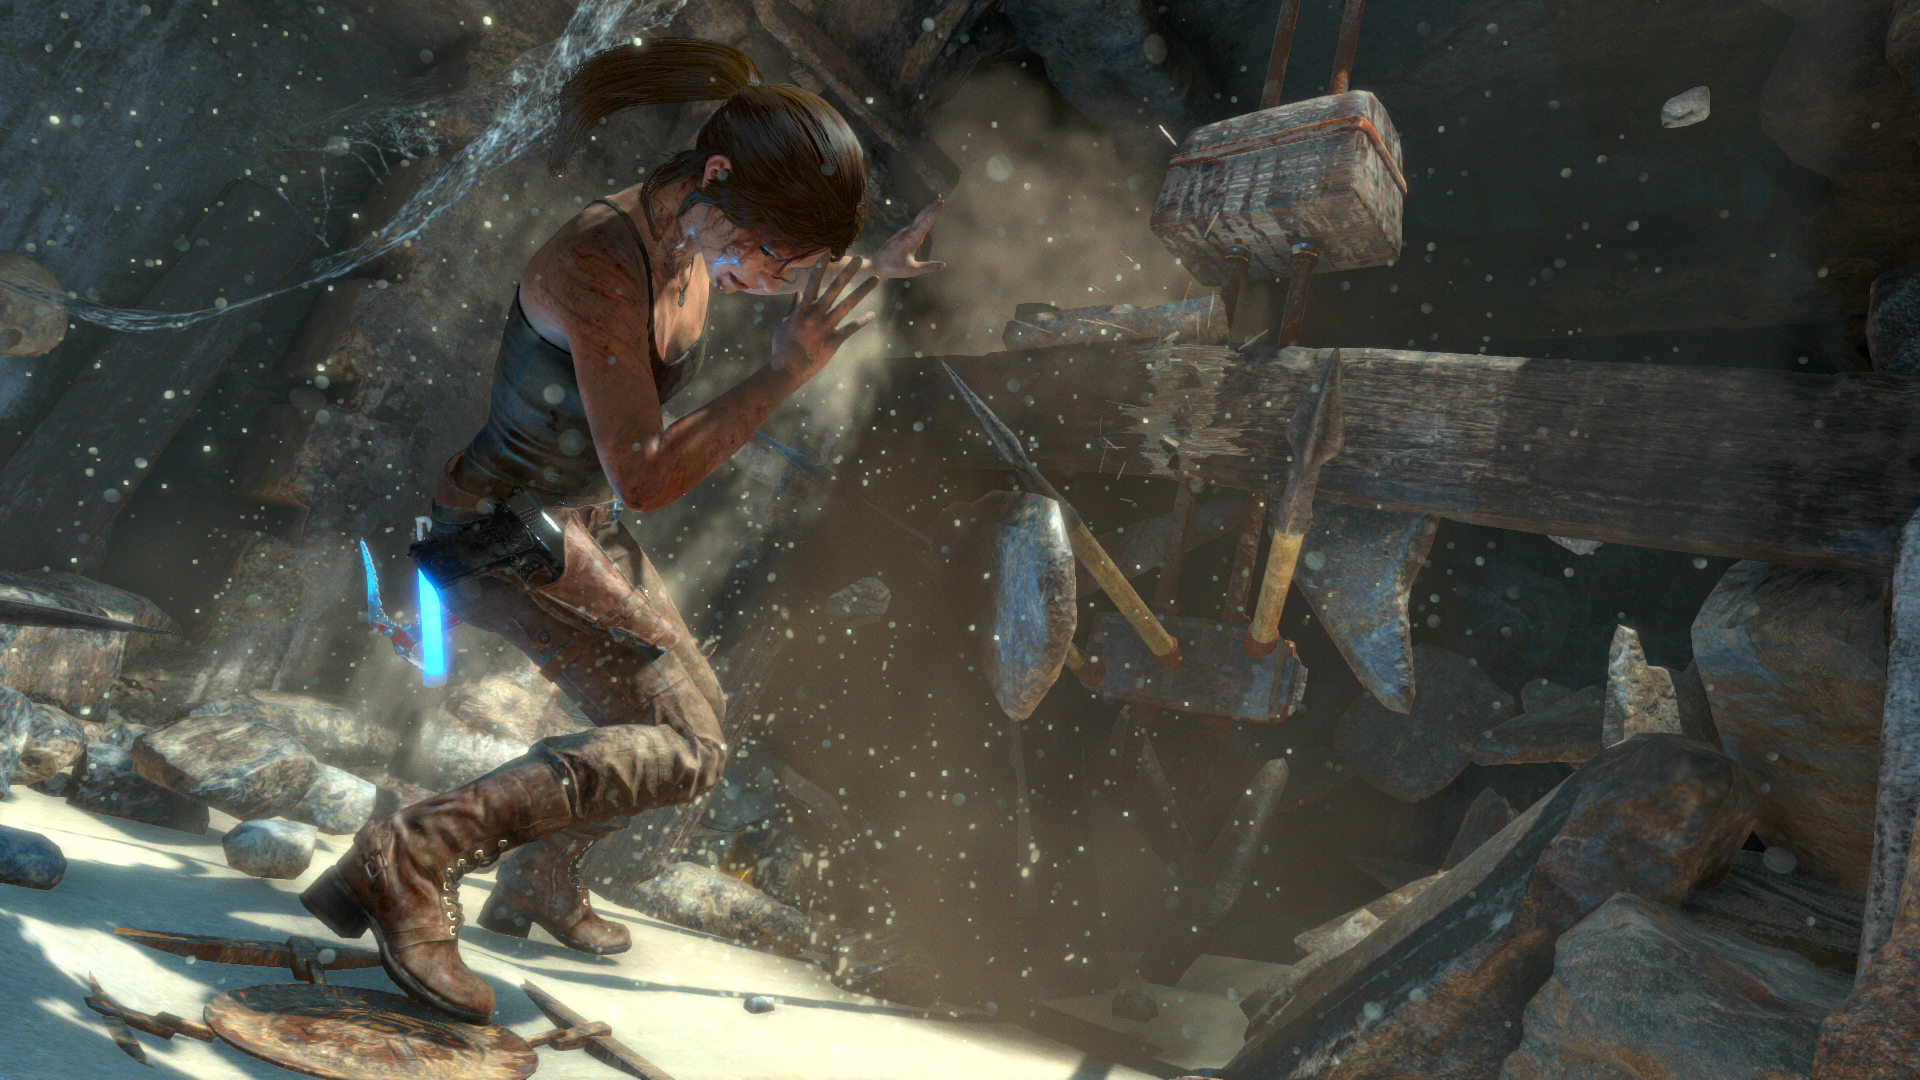 Media asset in full size related to 3dfxzone.it news item entitled as follows: Microsoft conferma che Rise of the Tomb Raider supporter DirectX 12 | Image Name: news23889_Rise-of-the-Tomb-Raider-Screenshot_2.jpg